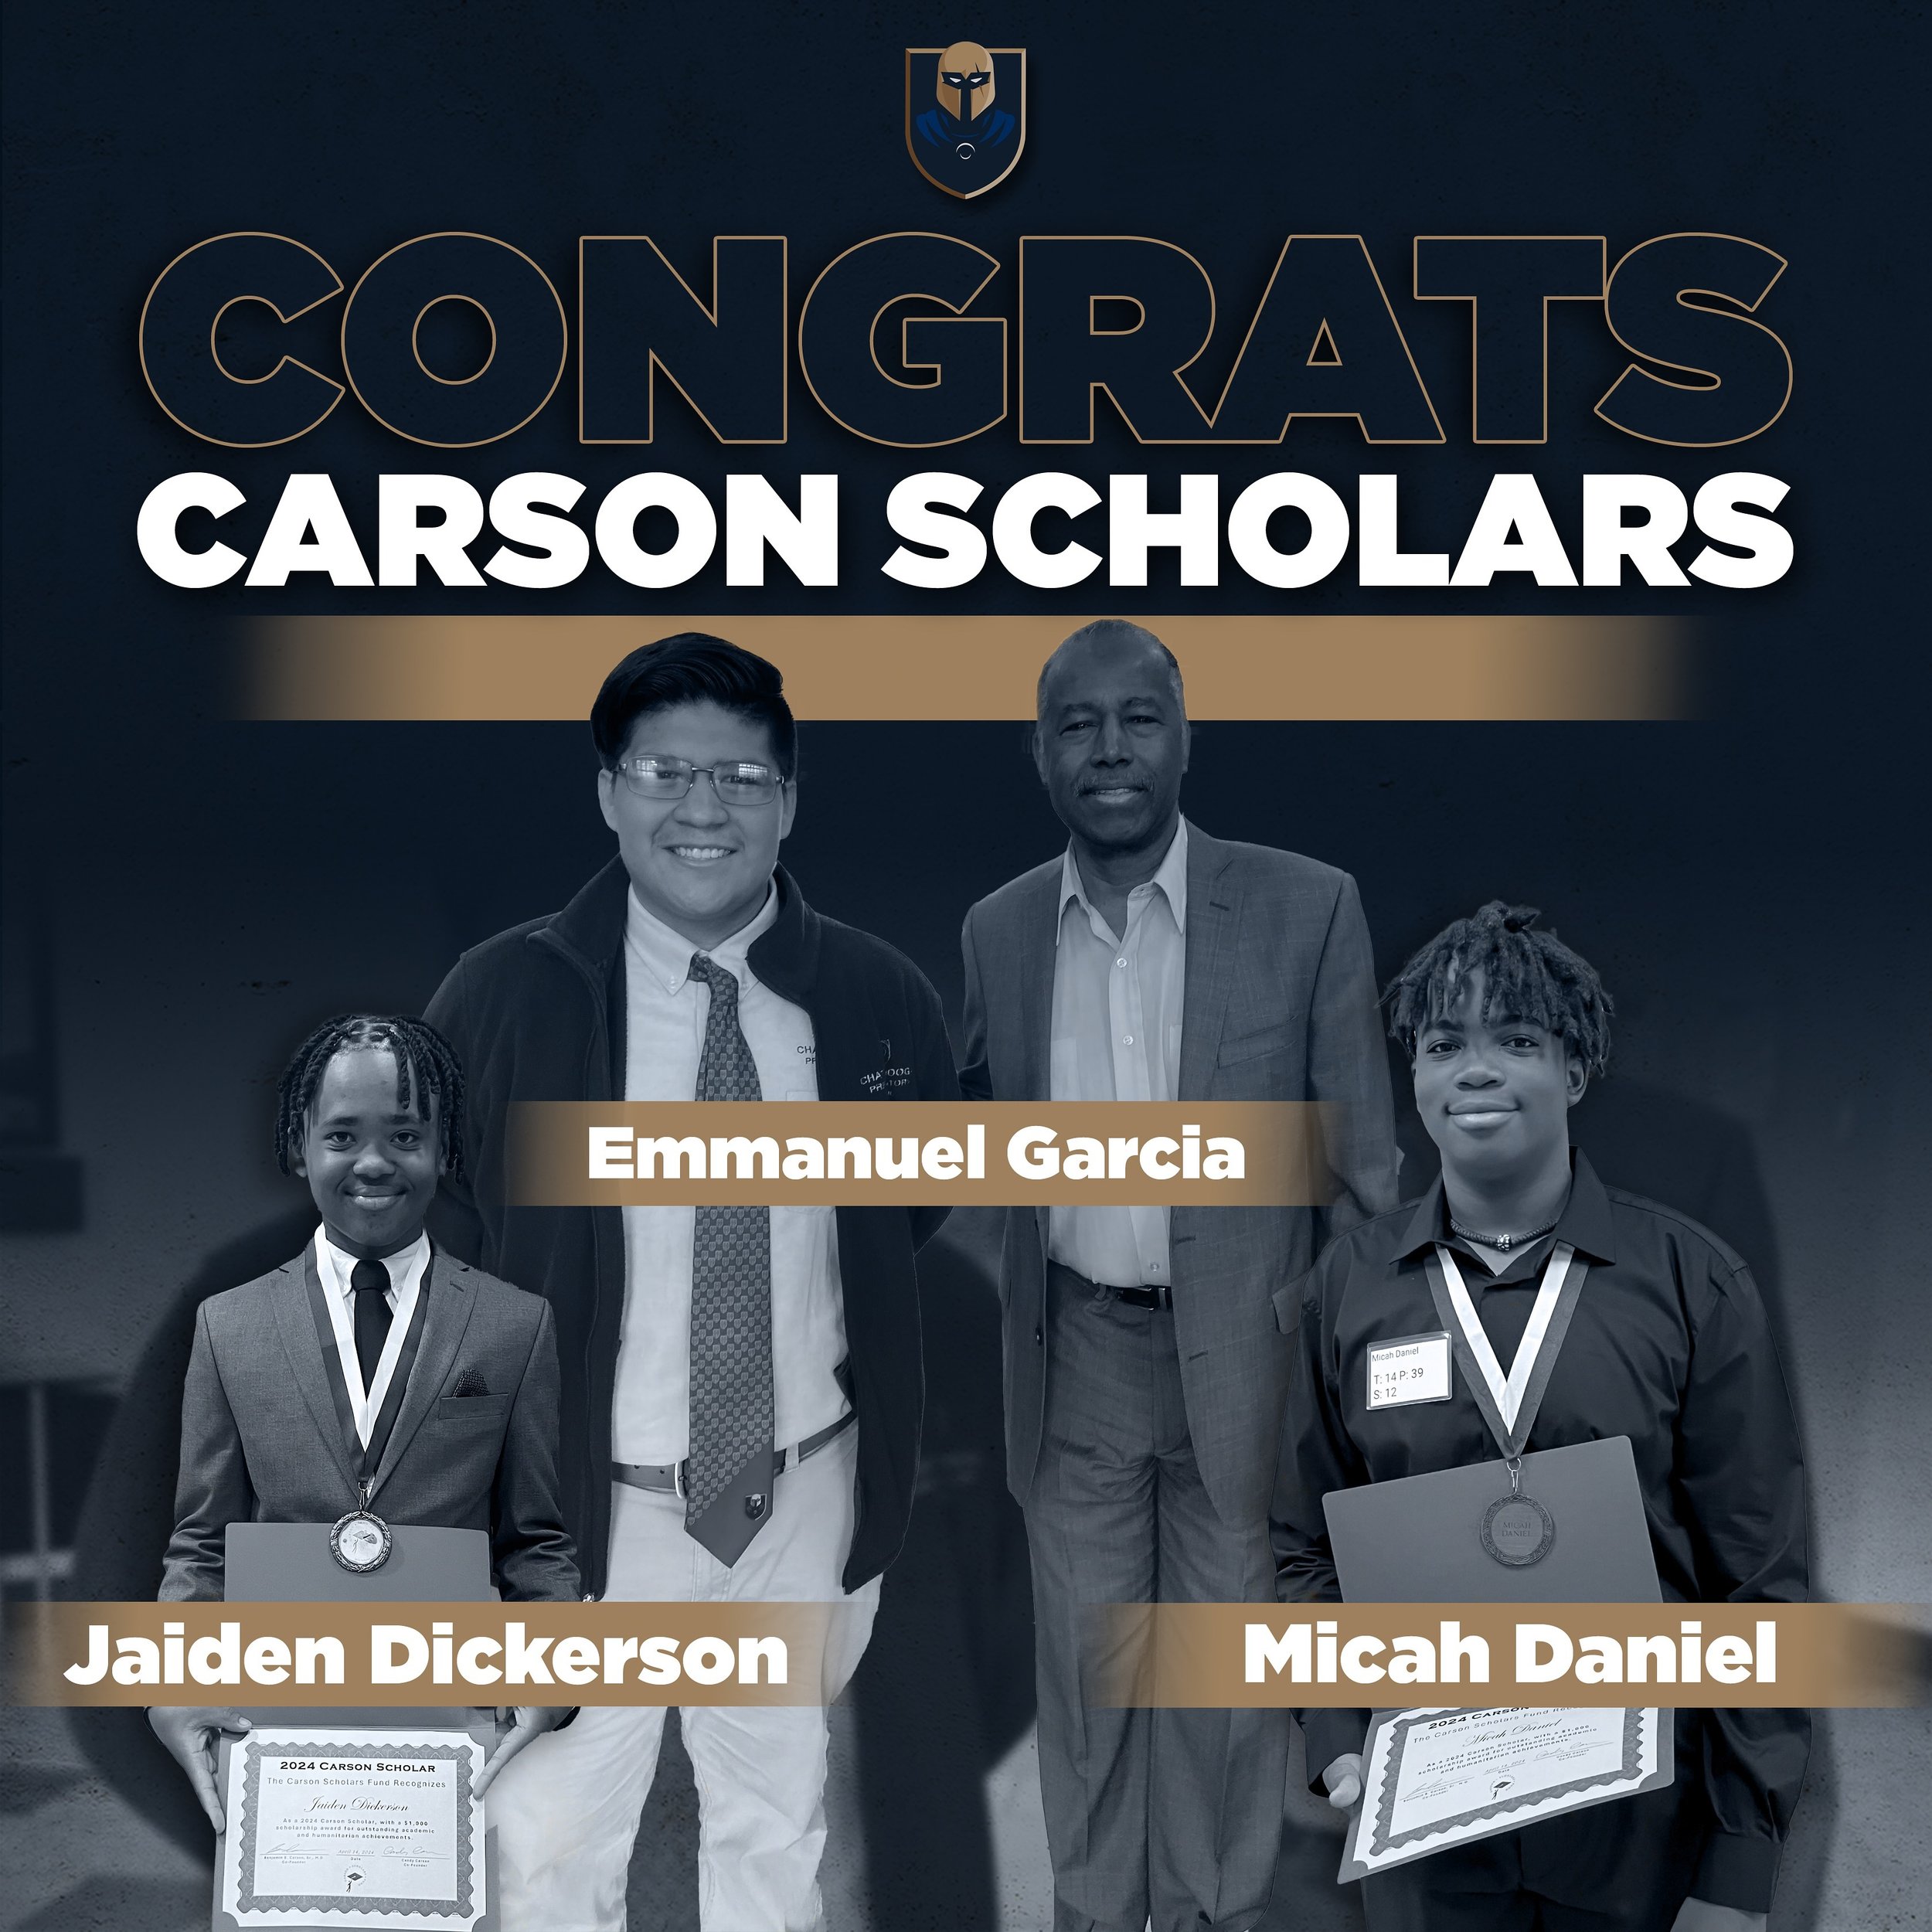 Congratulations to our newest Carson Scholars! The Carson Scholars Fund awards $1,000 college scholarships to students in grades 4-11&nbsp;who excel academically and are dedicated to serving their communities.
&bull;&bull;&bull;&bull;&bull;
#scholars